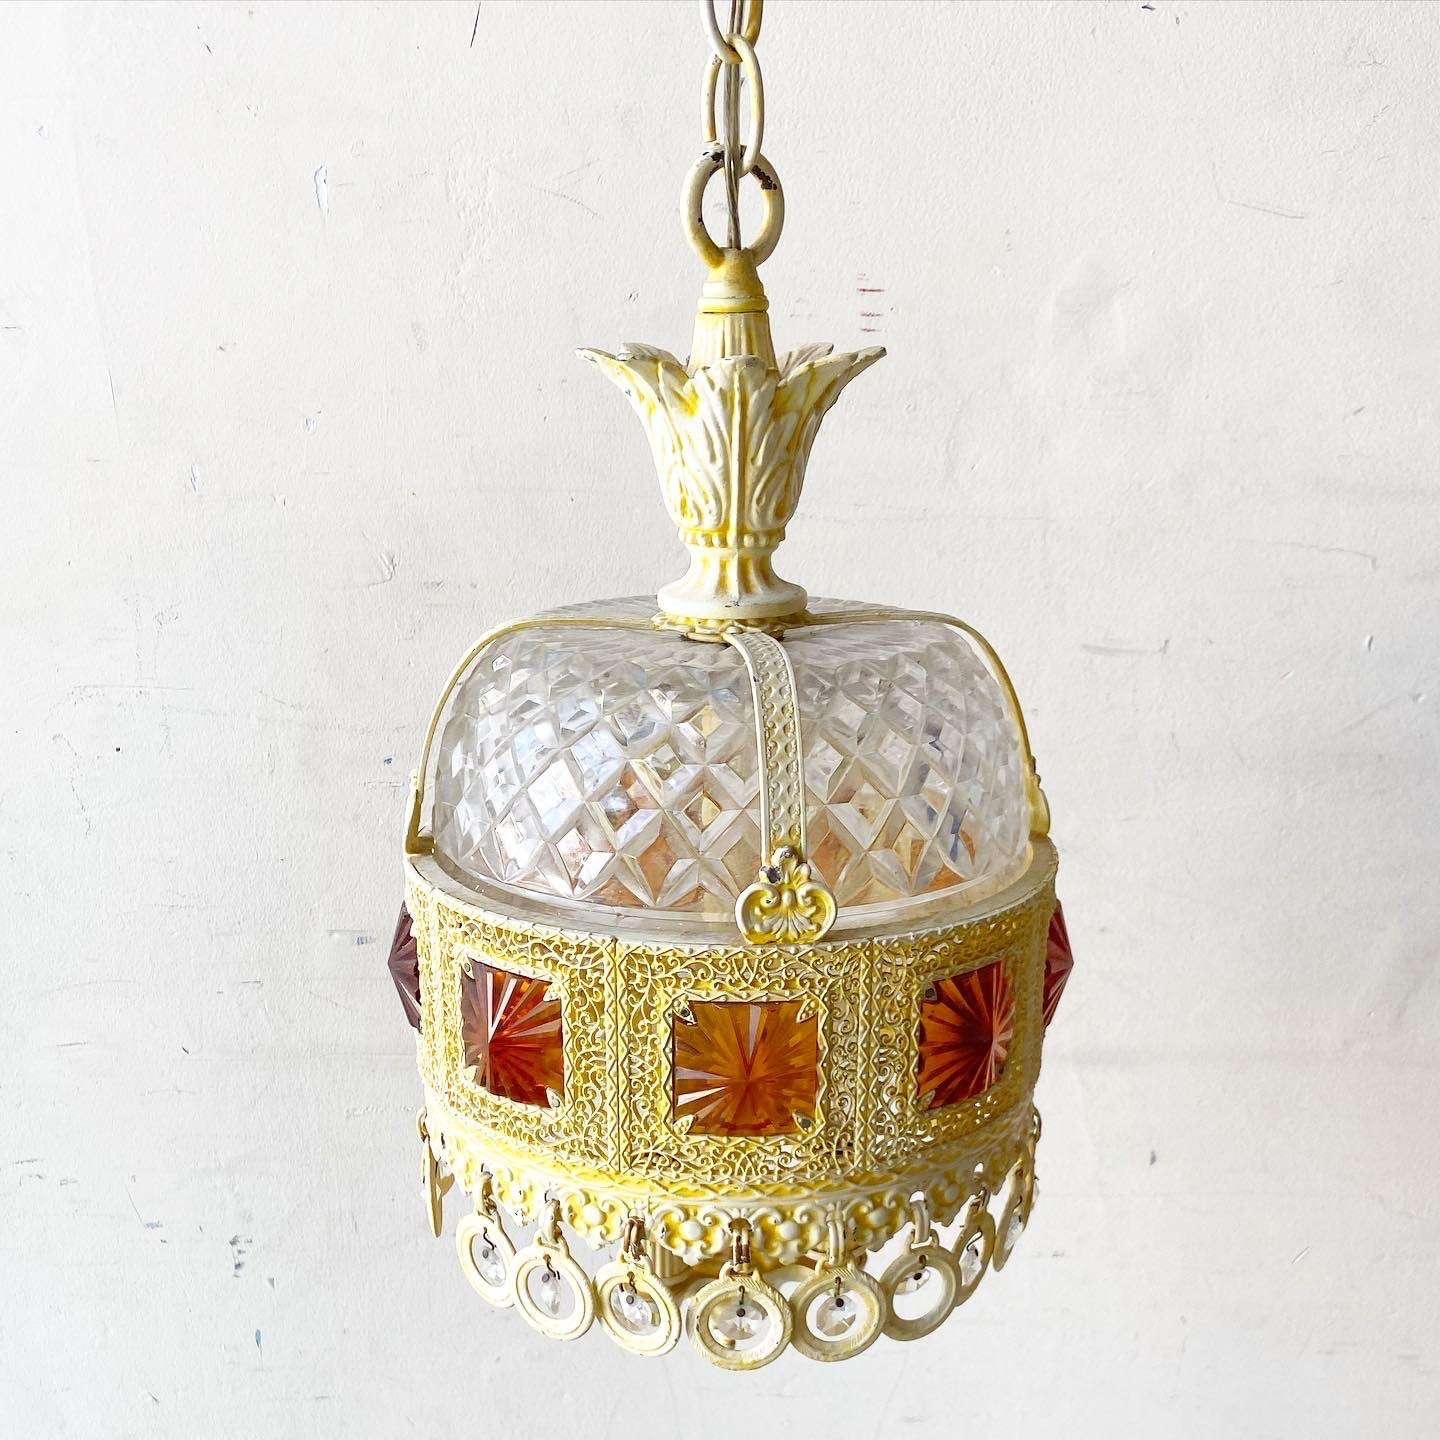 Amazing vintage regency pendant/swag lamp. Features a cream finish over the metal with orange glass square and “Crystal” accents.